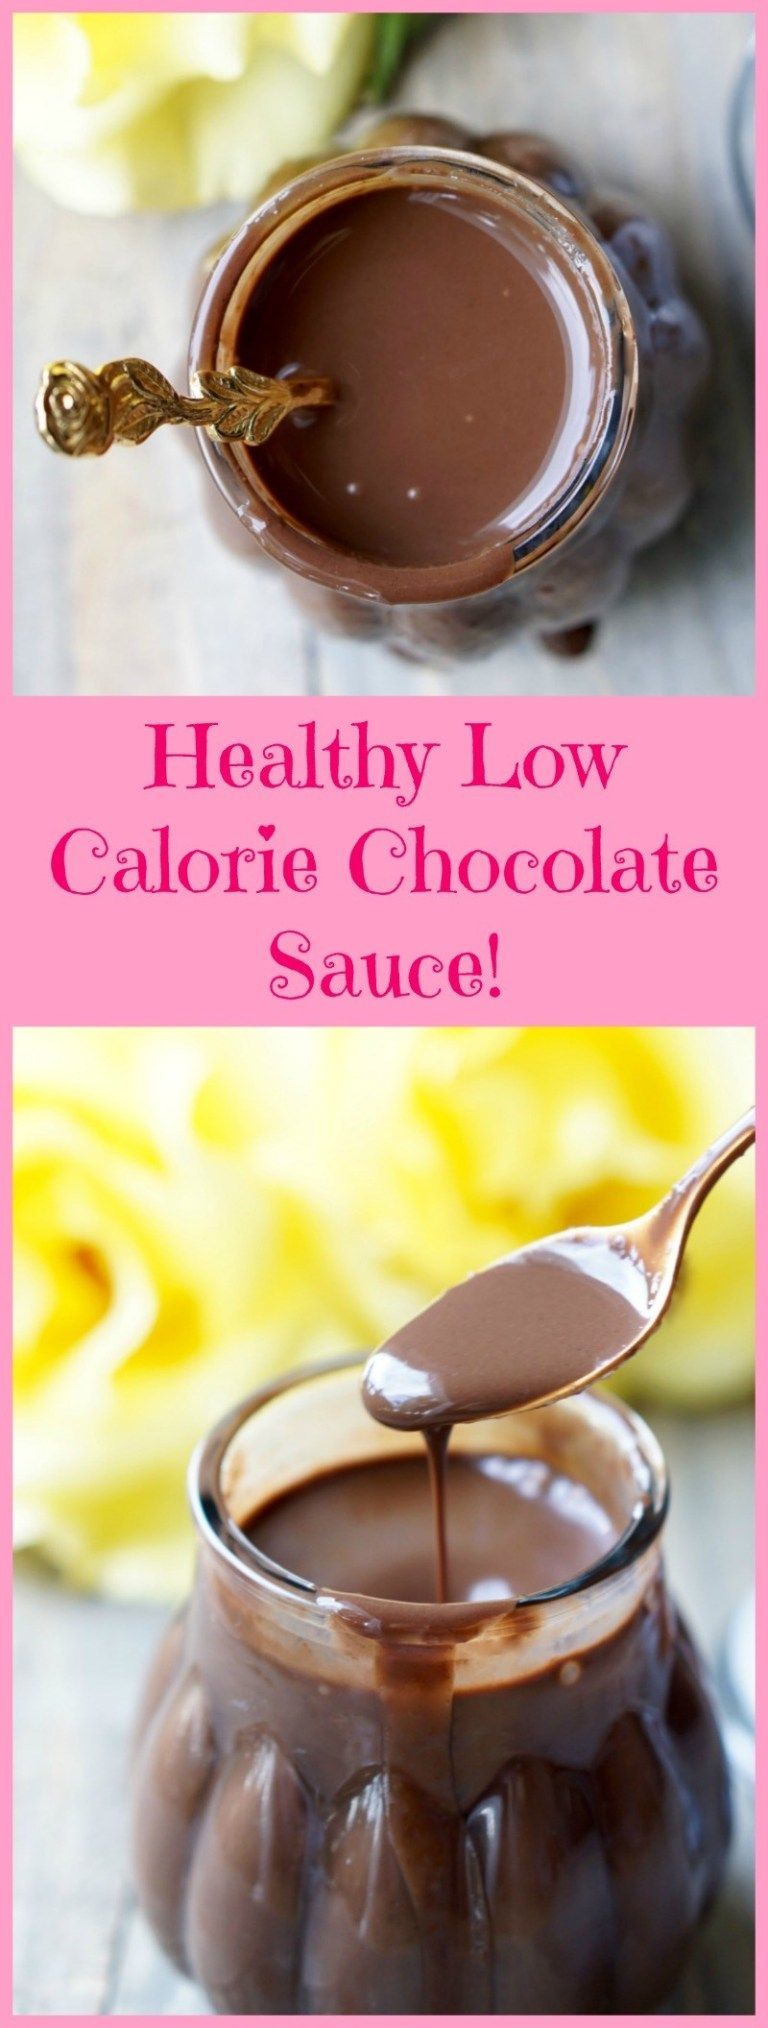 Low Calorie Chocolate Sauce -   15 healthy recipes With Calories gluten free ideas